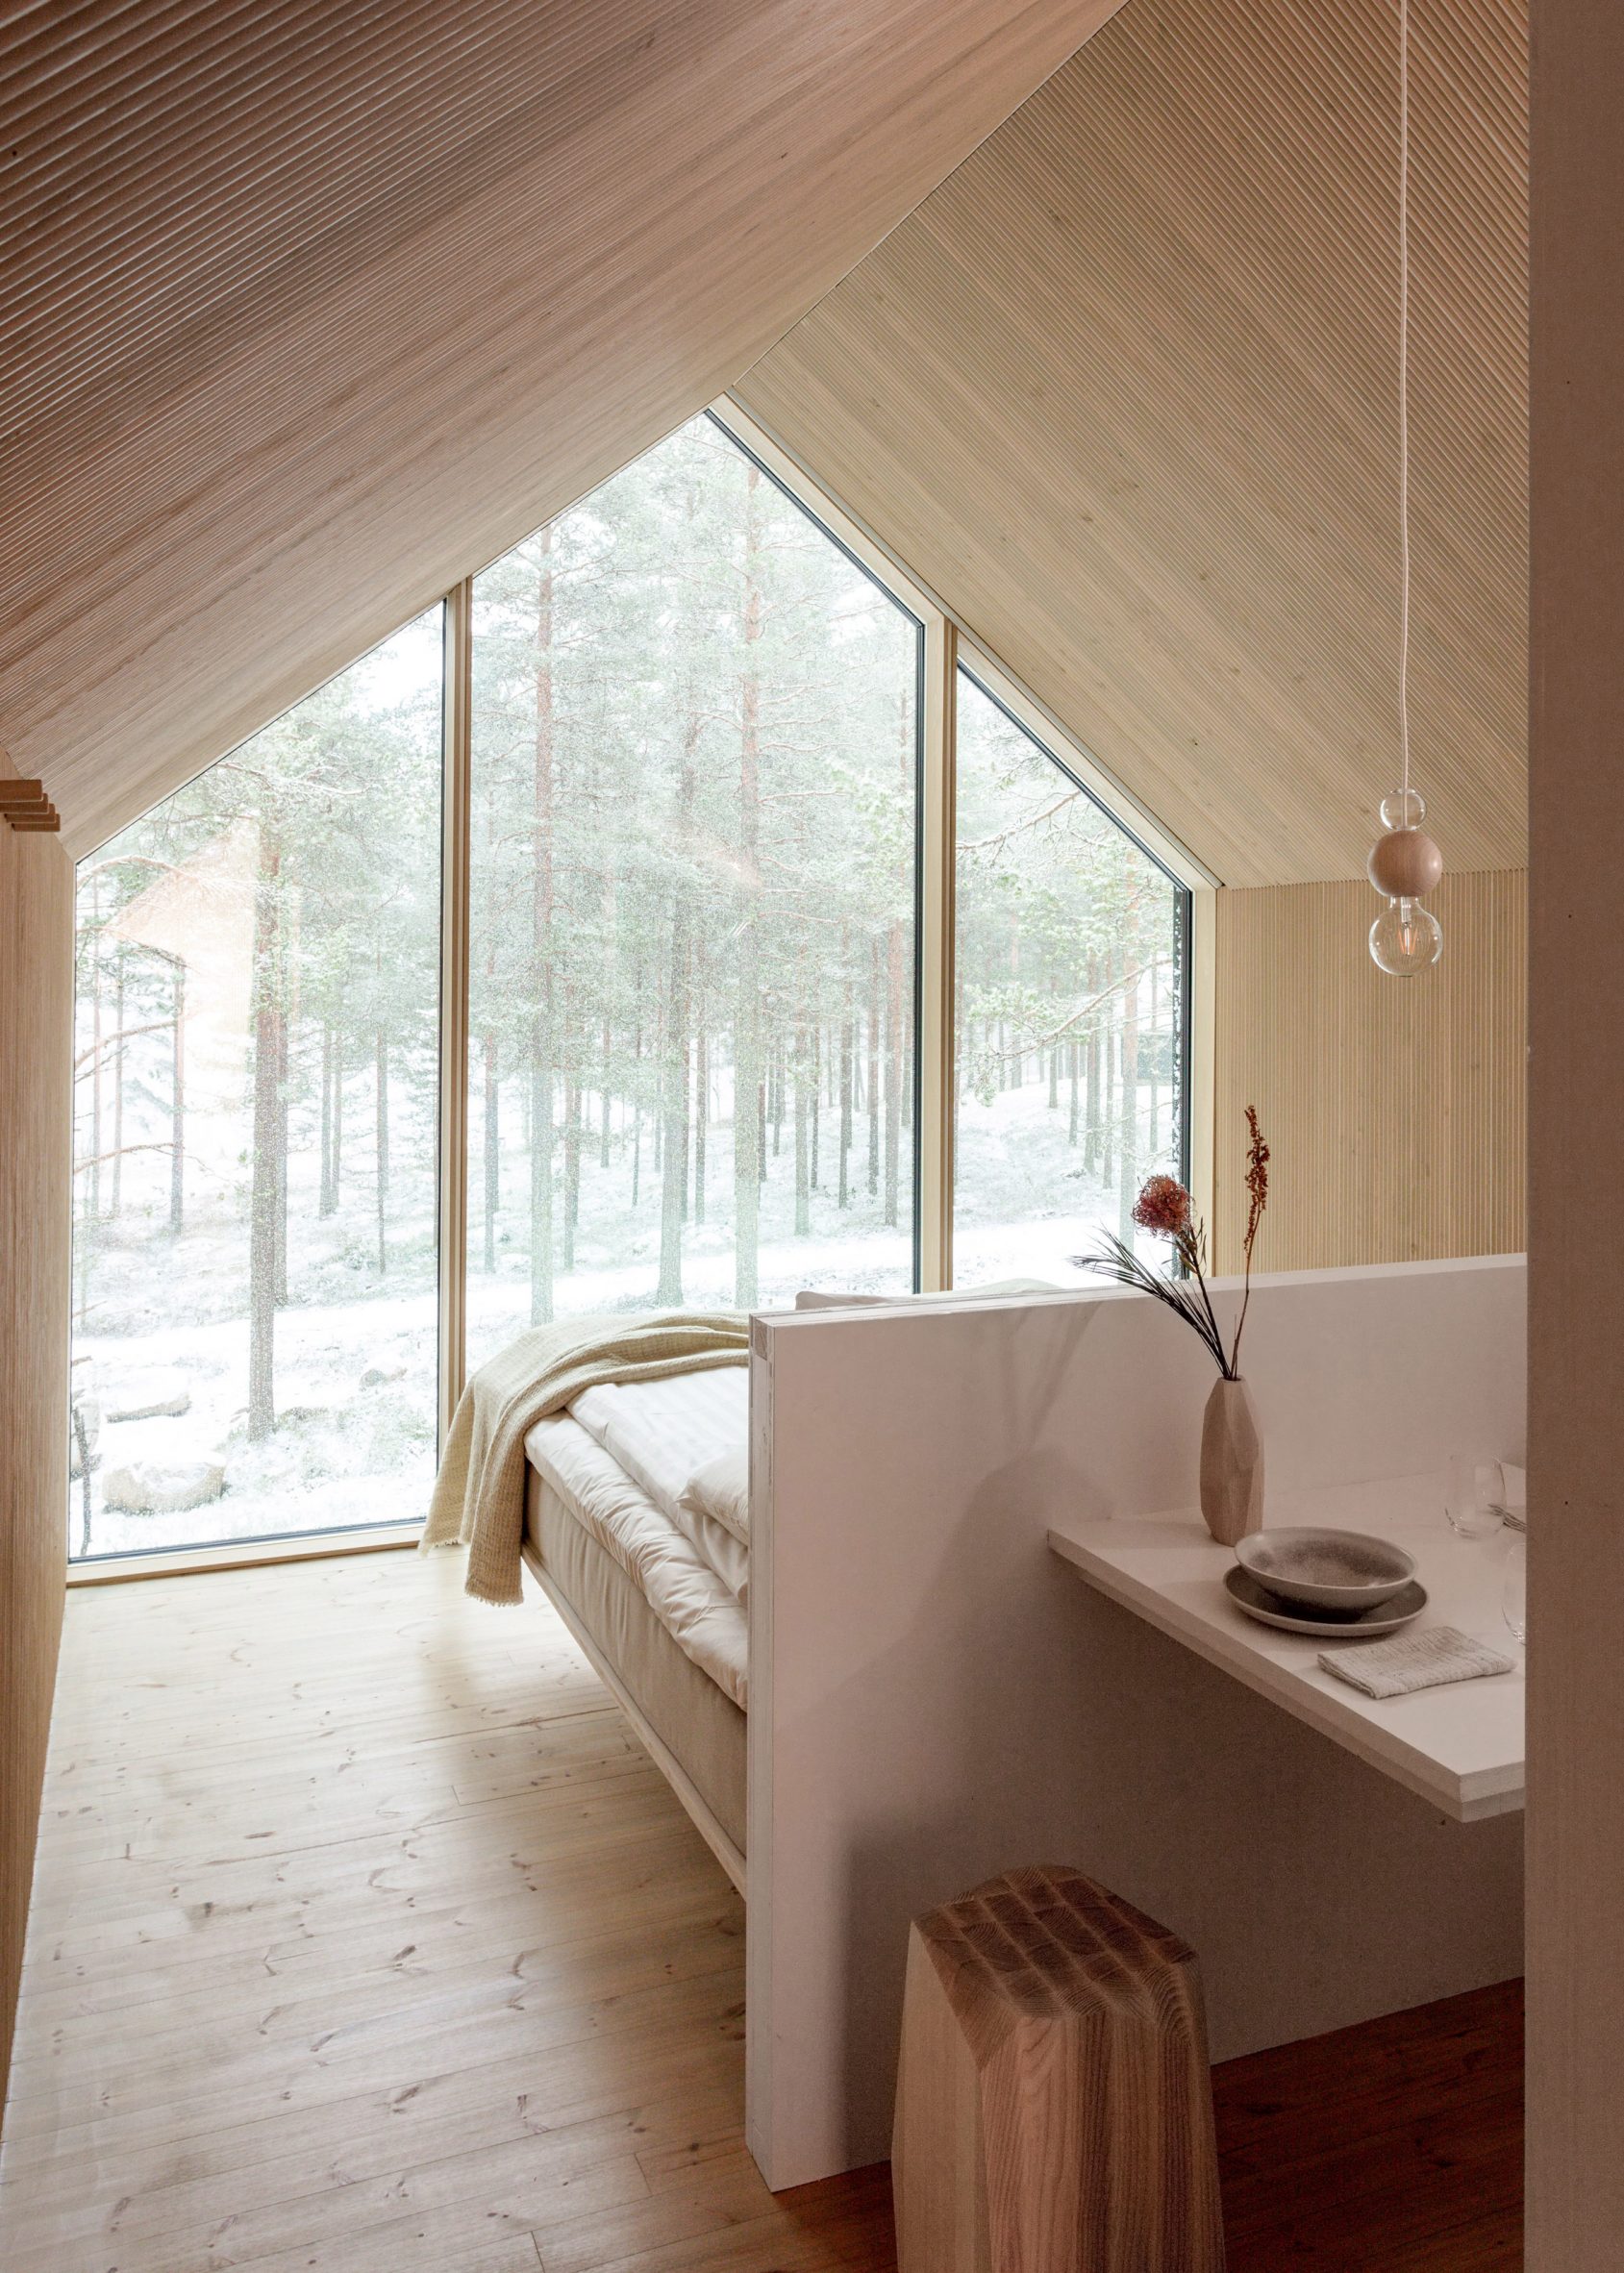 Gable ended bedroom by studio puisto